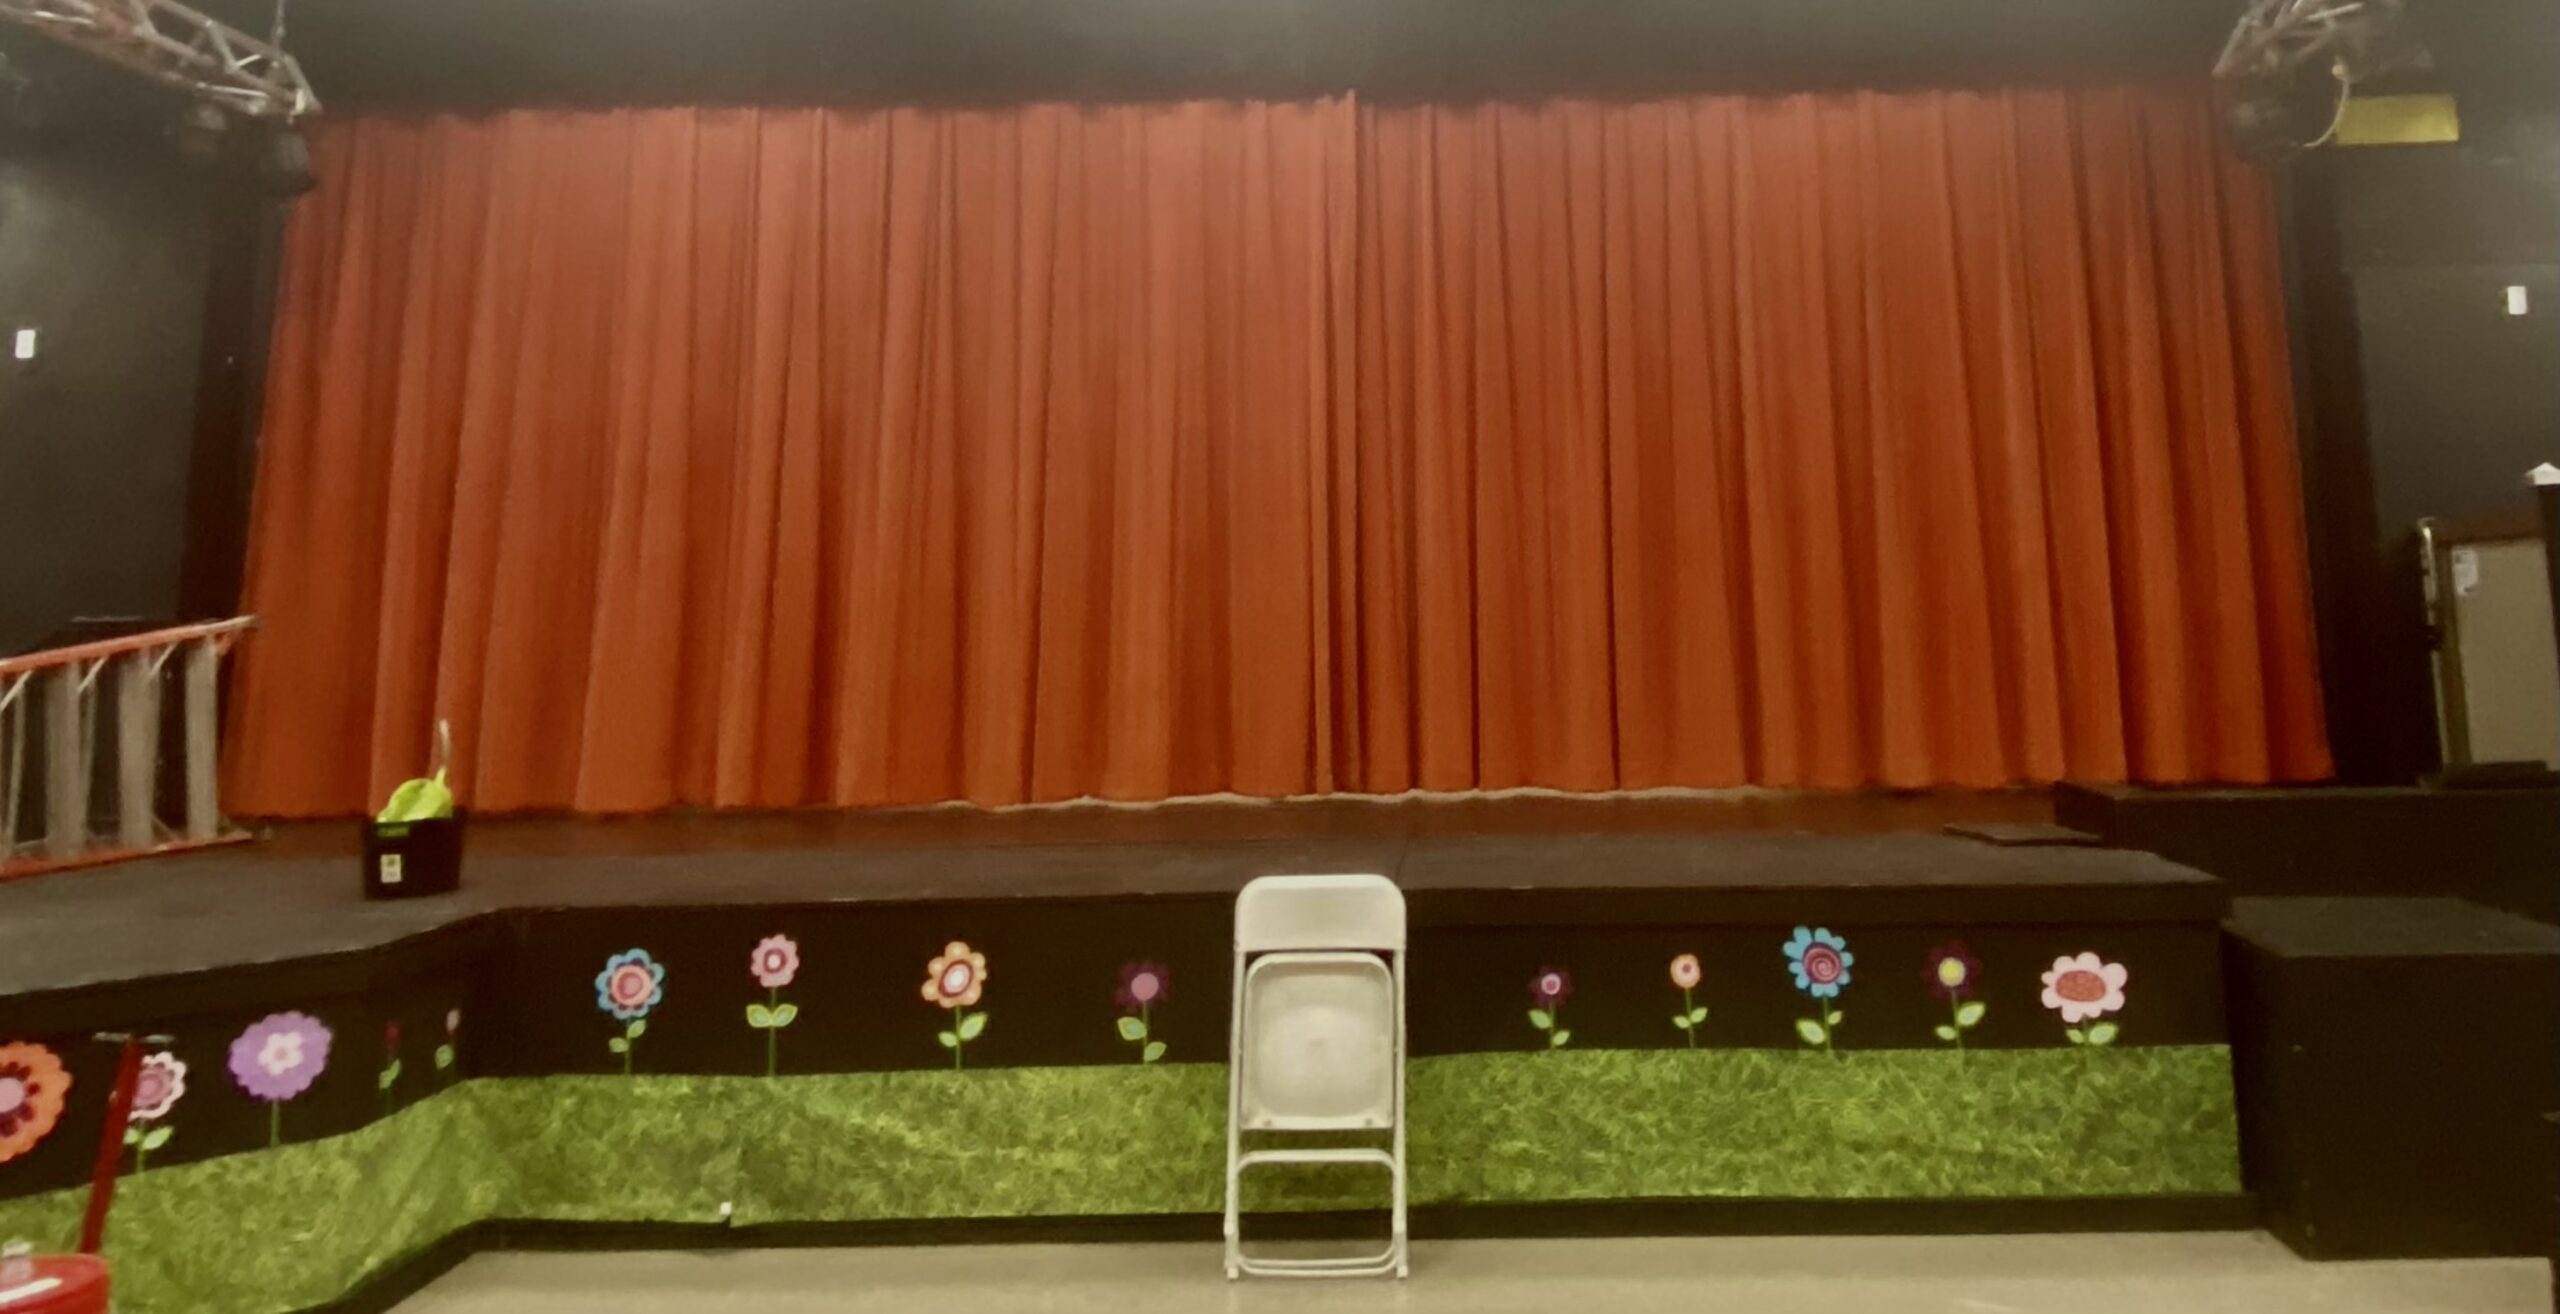 A stage with flowers and red curtains